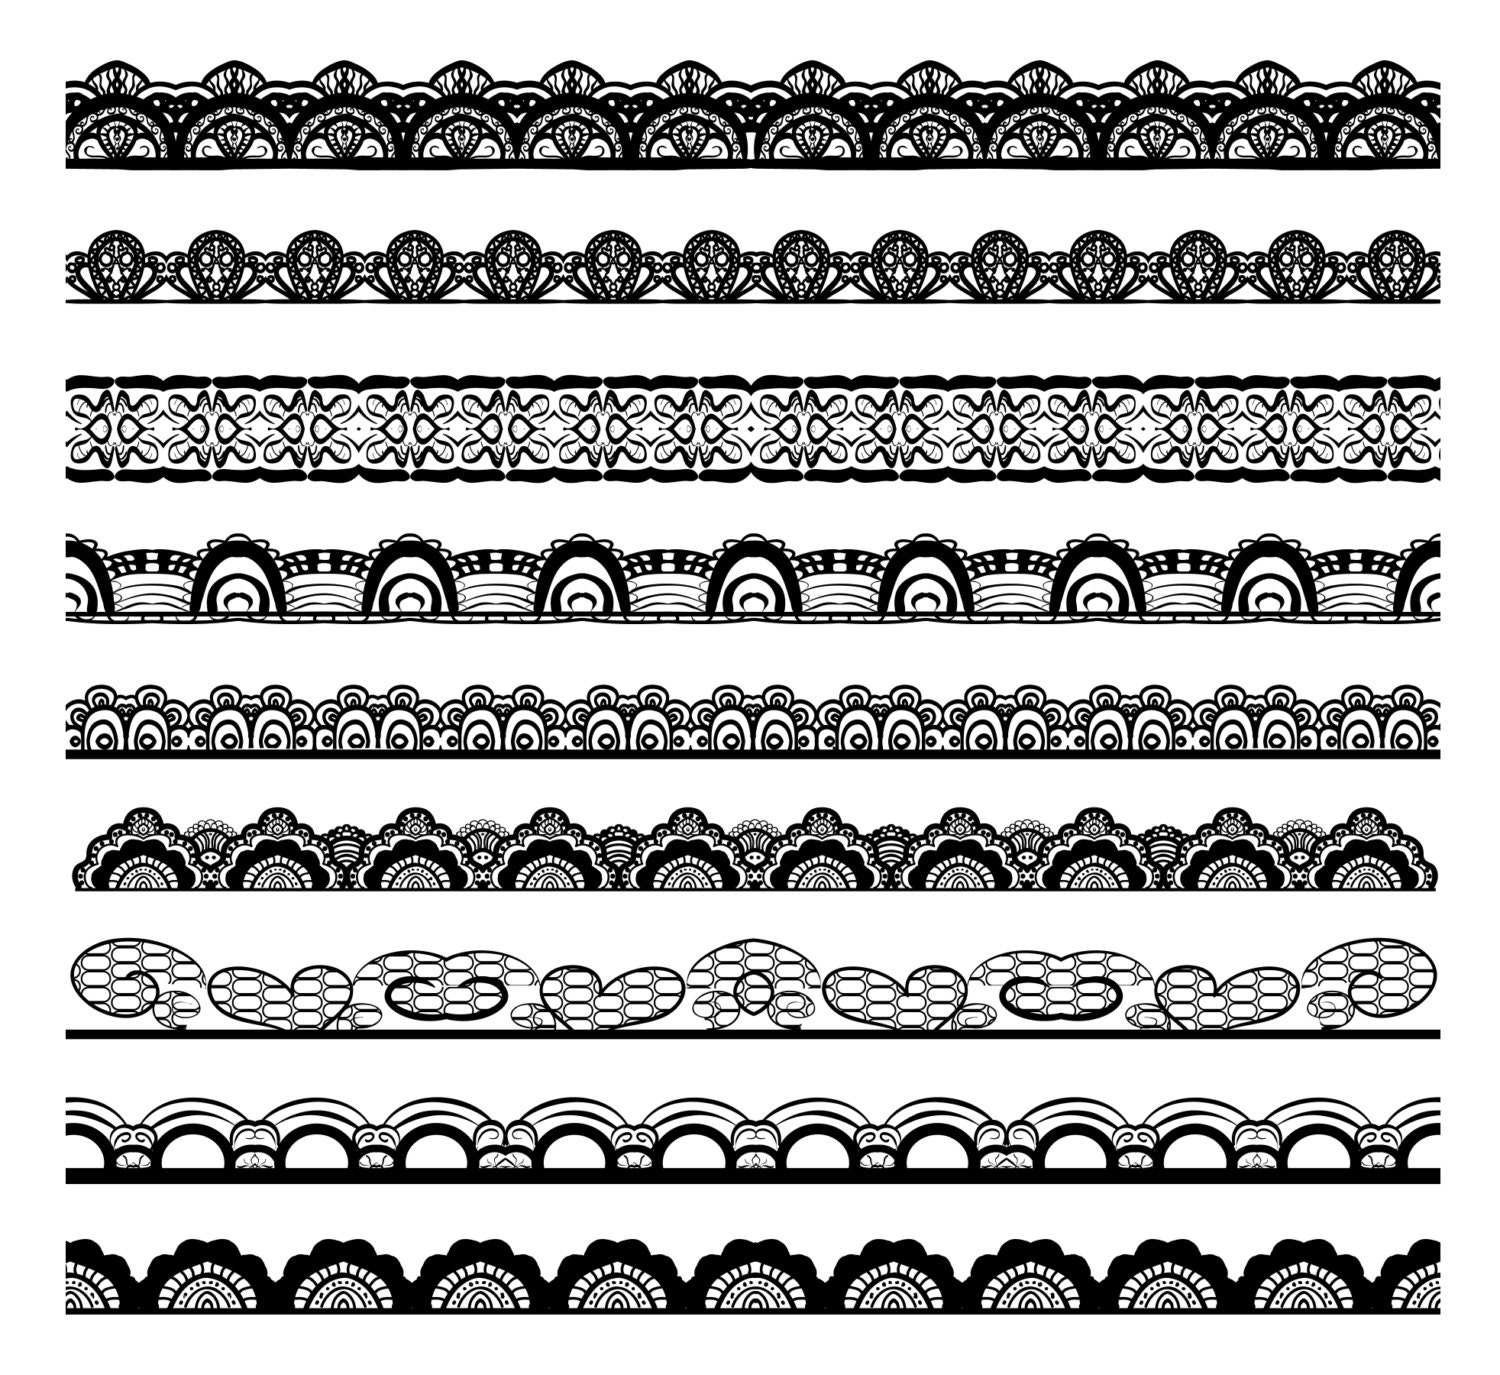 Lace Border Clip Art, Digital Clipart, lace digital clipart, Black border  clipart, White Lace clipart, Personal and Commercial Use